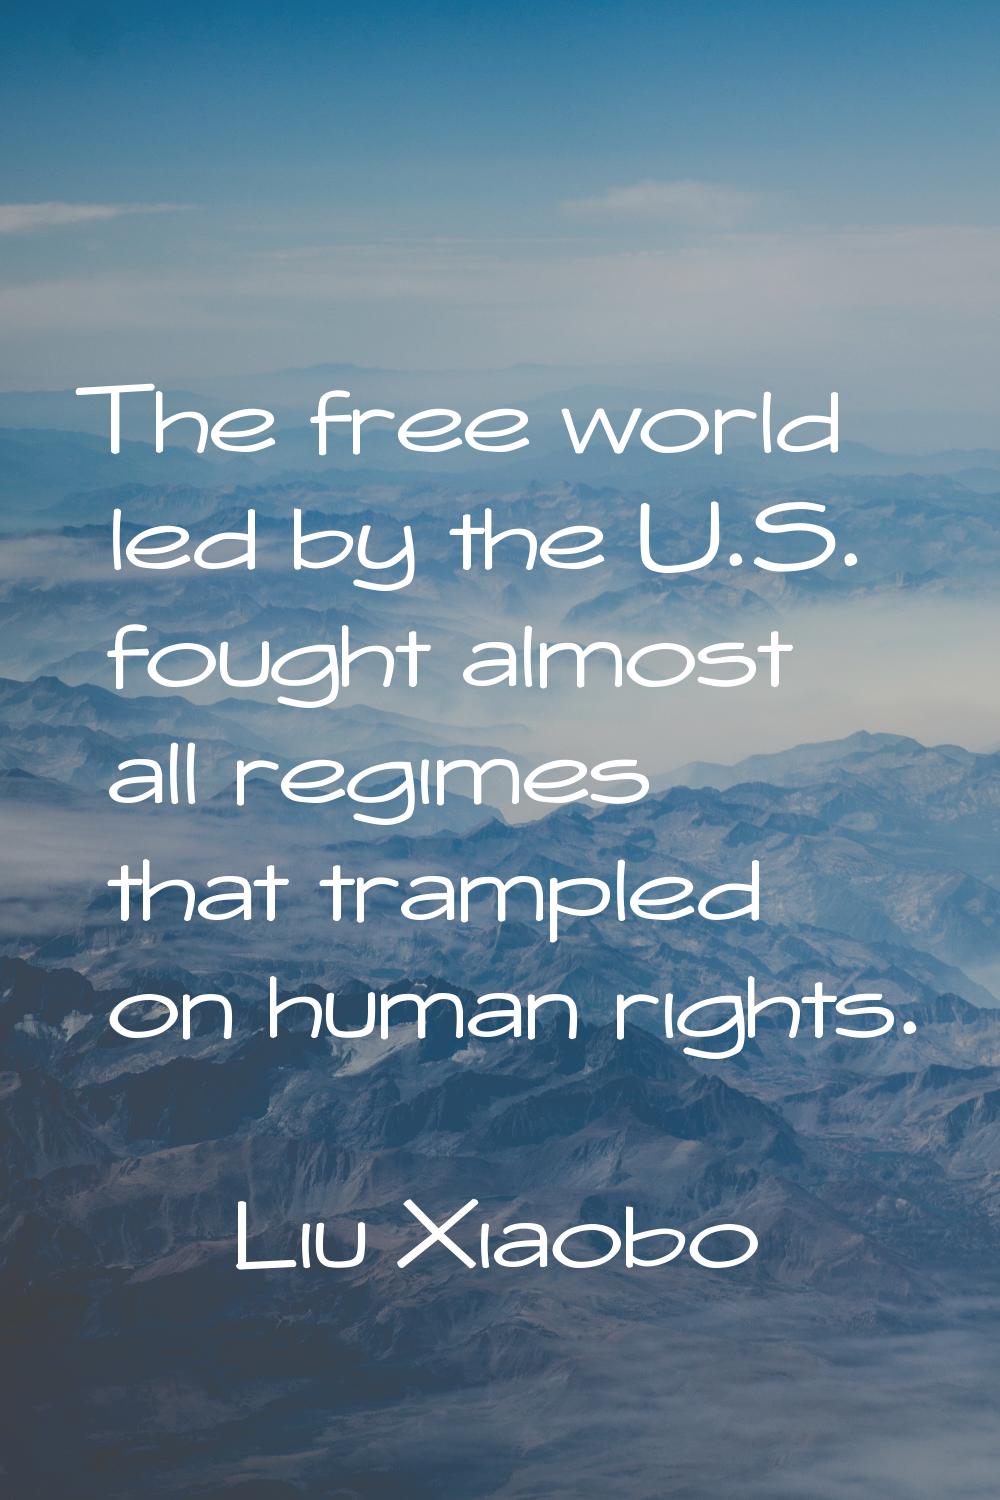 The free world led by the U.S. fought almost all regimes that trampled on human rights.